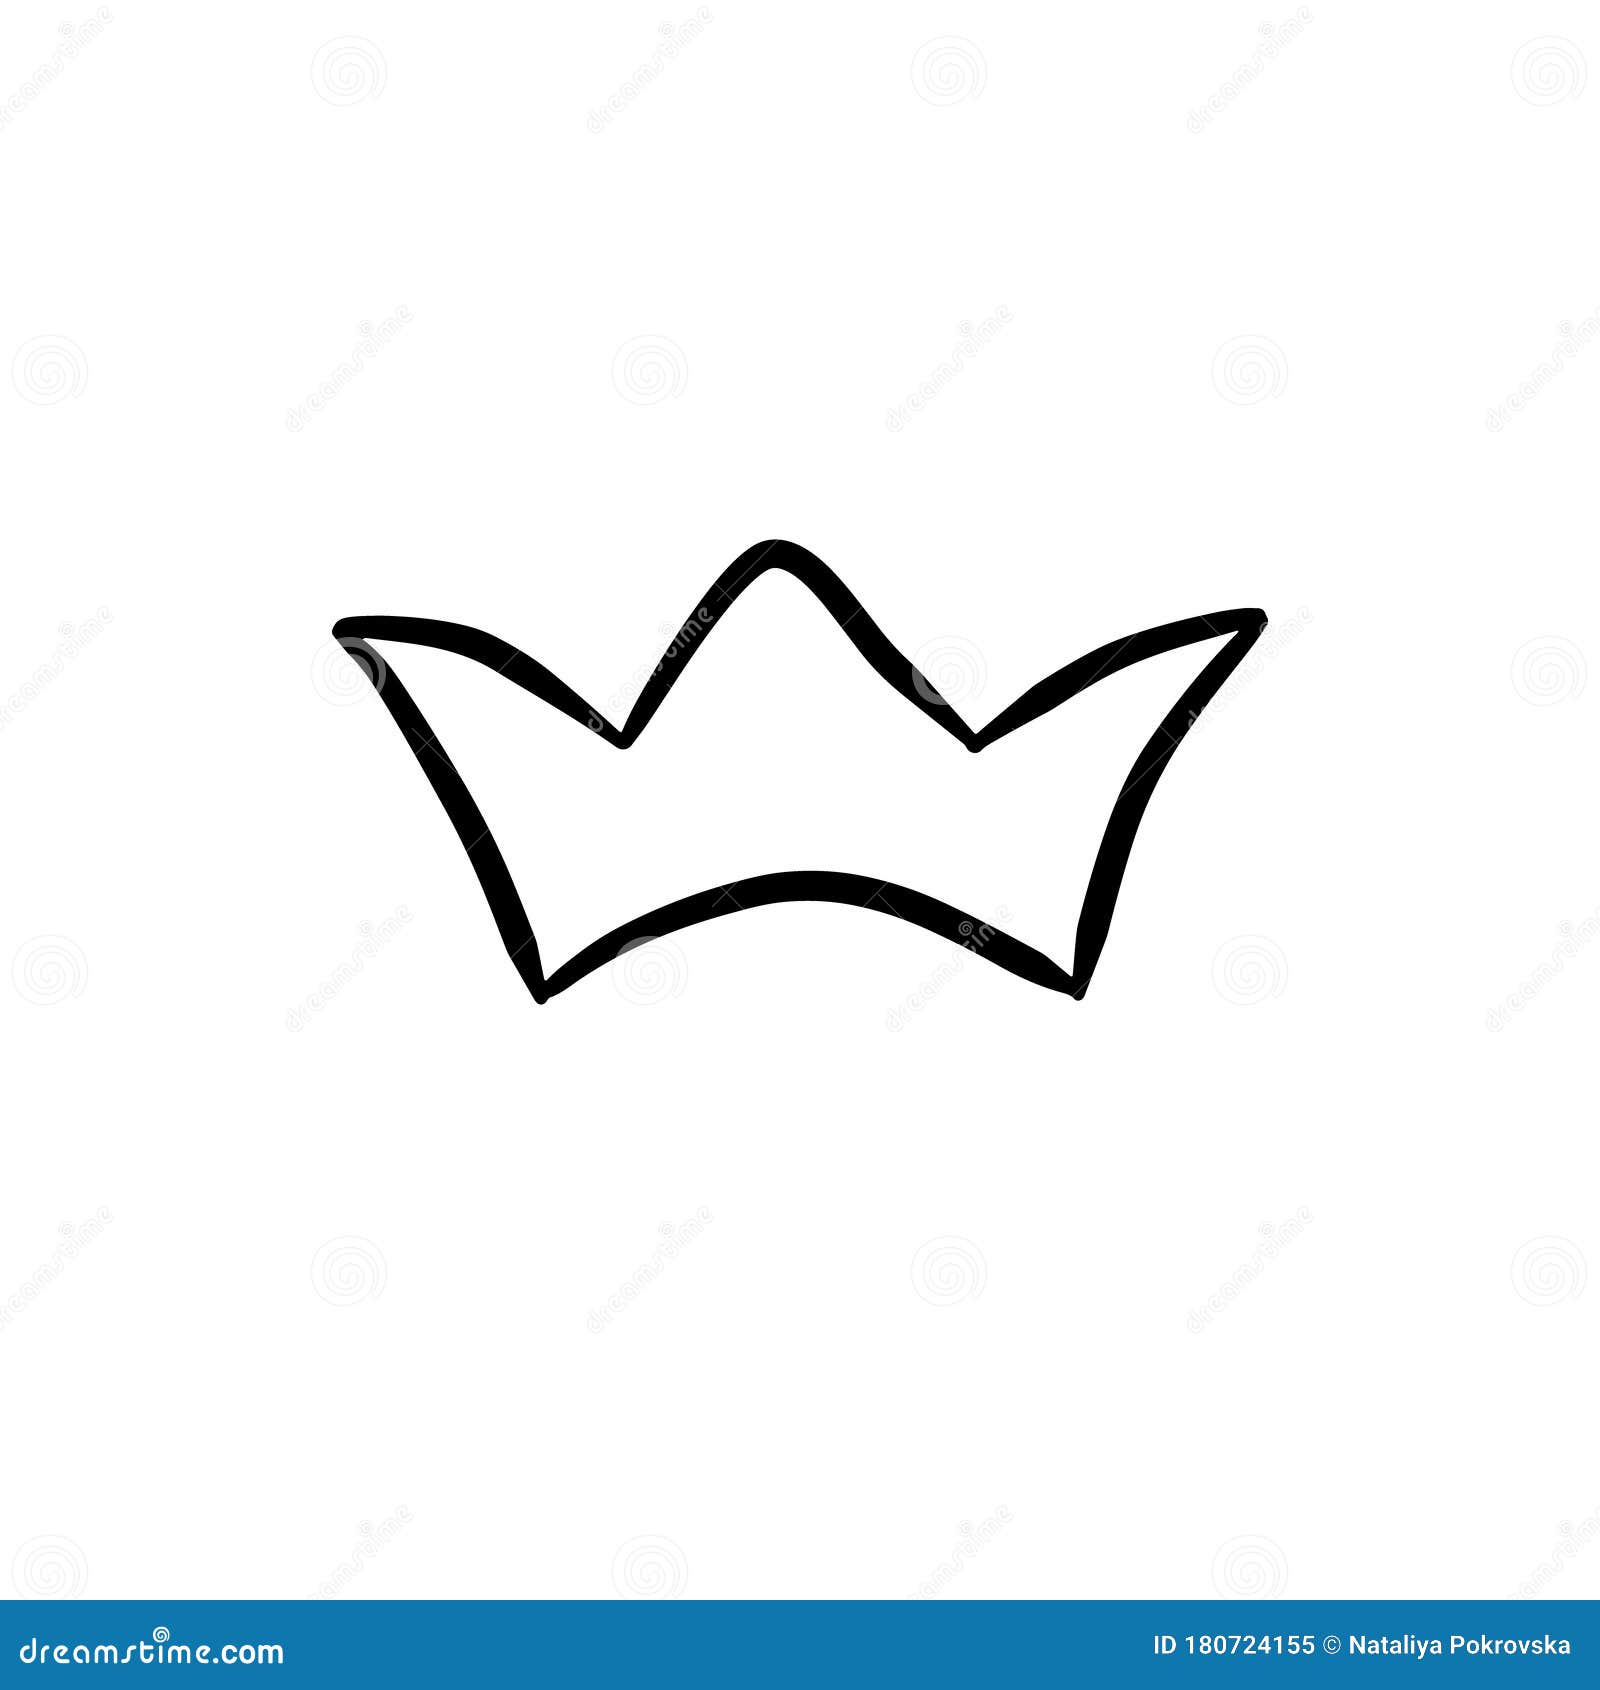 Simple Crown Isolated on White Background. Vector Illustartion in ...